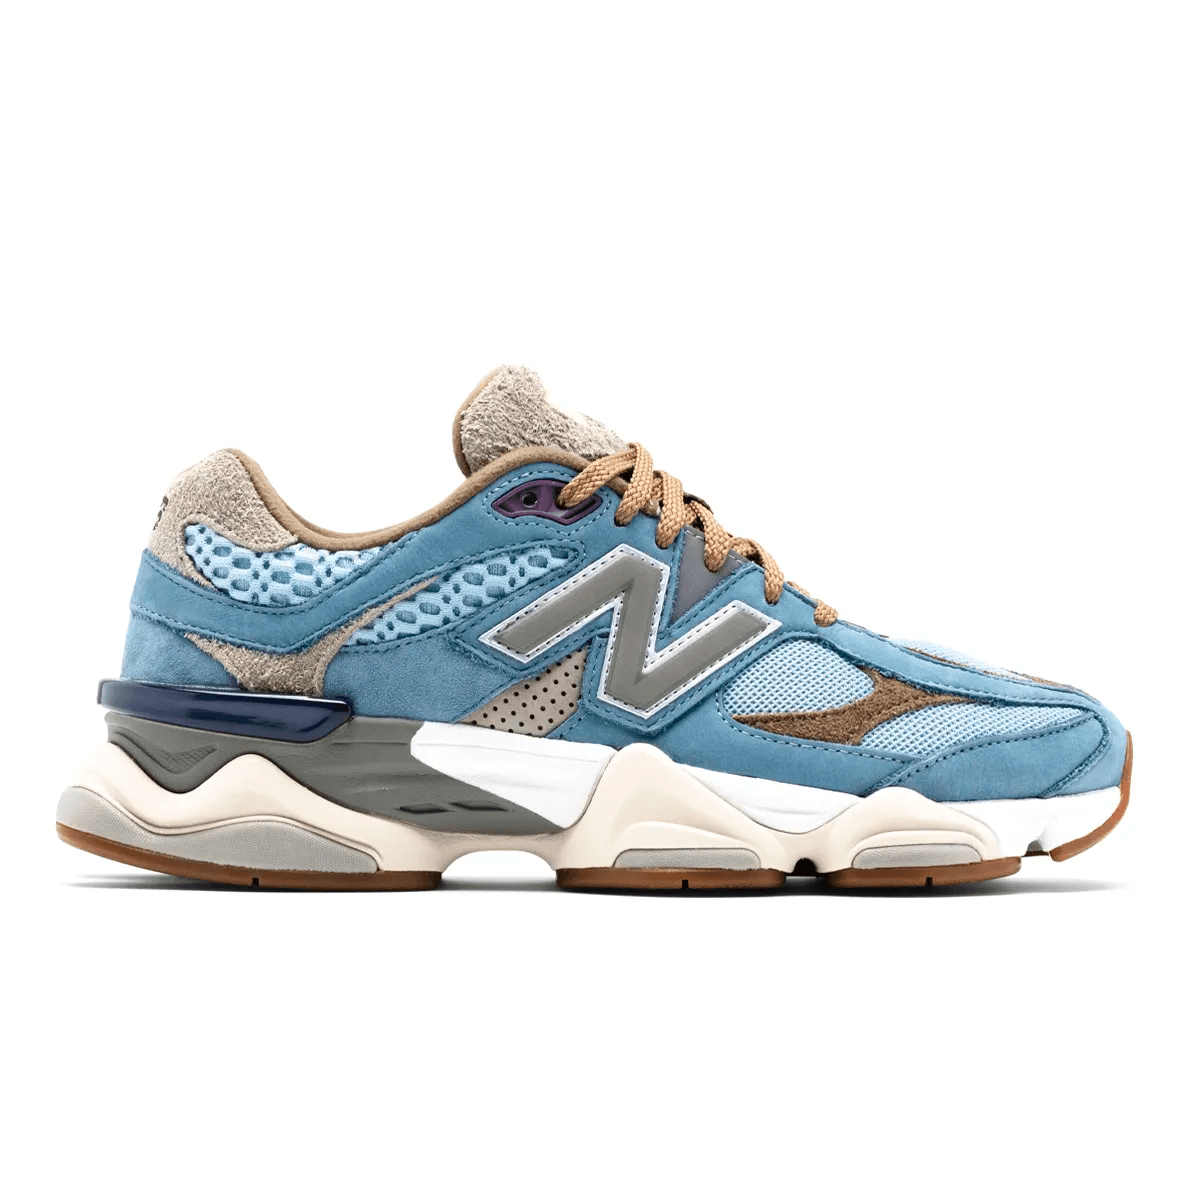 The Bodega x New Balance 9060 Age of Discovery Is Releasing Soon